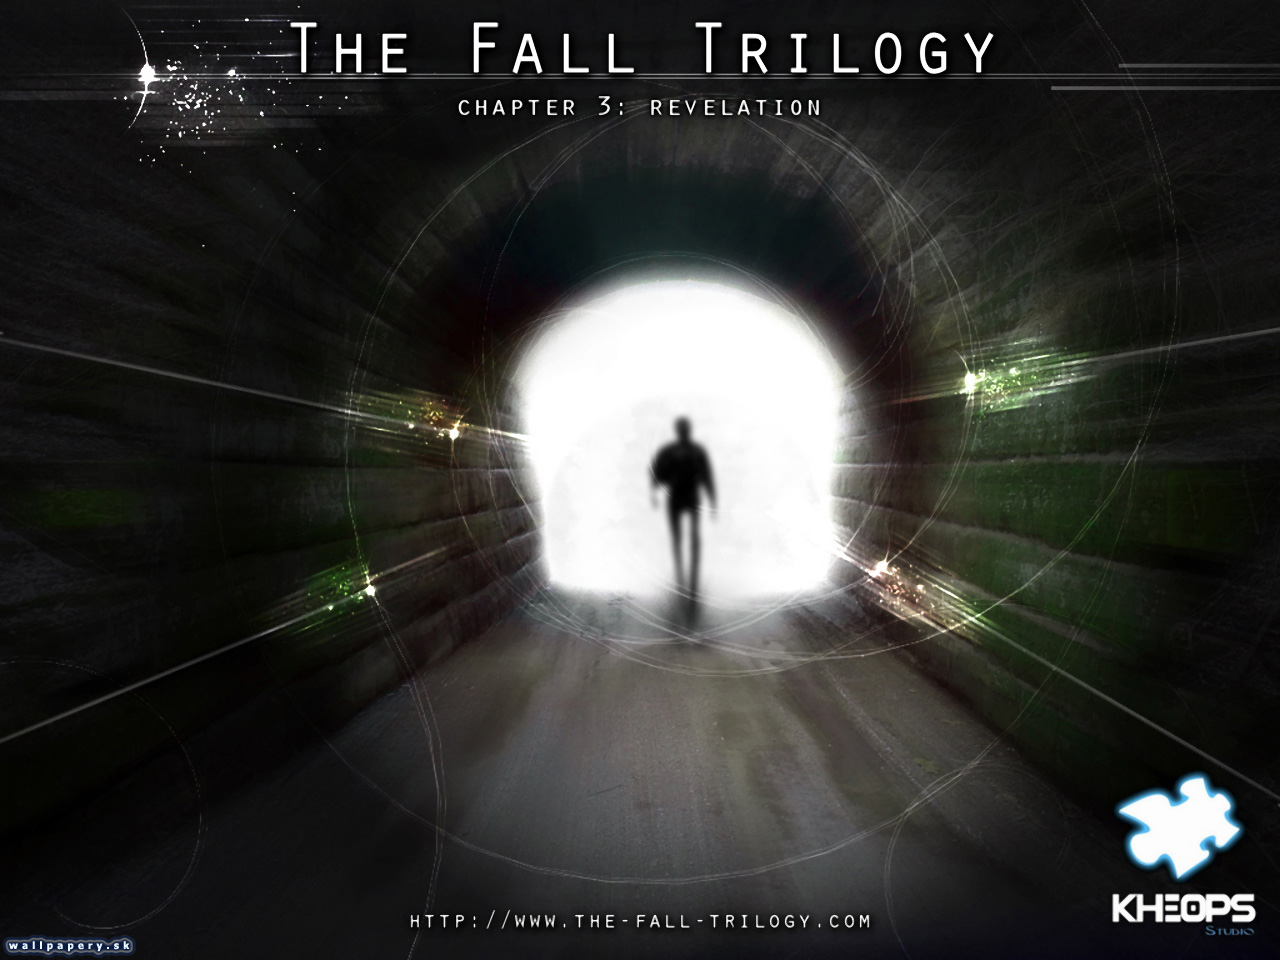 The Fall Trilogy - Chapter 3: Revelation - wallpaper 1